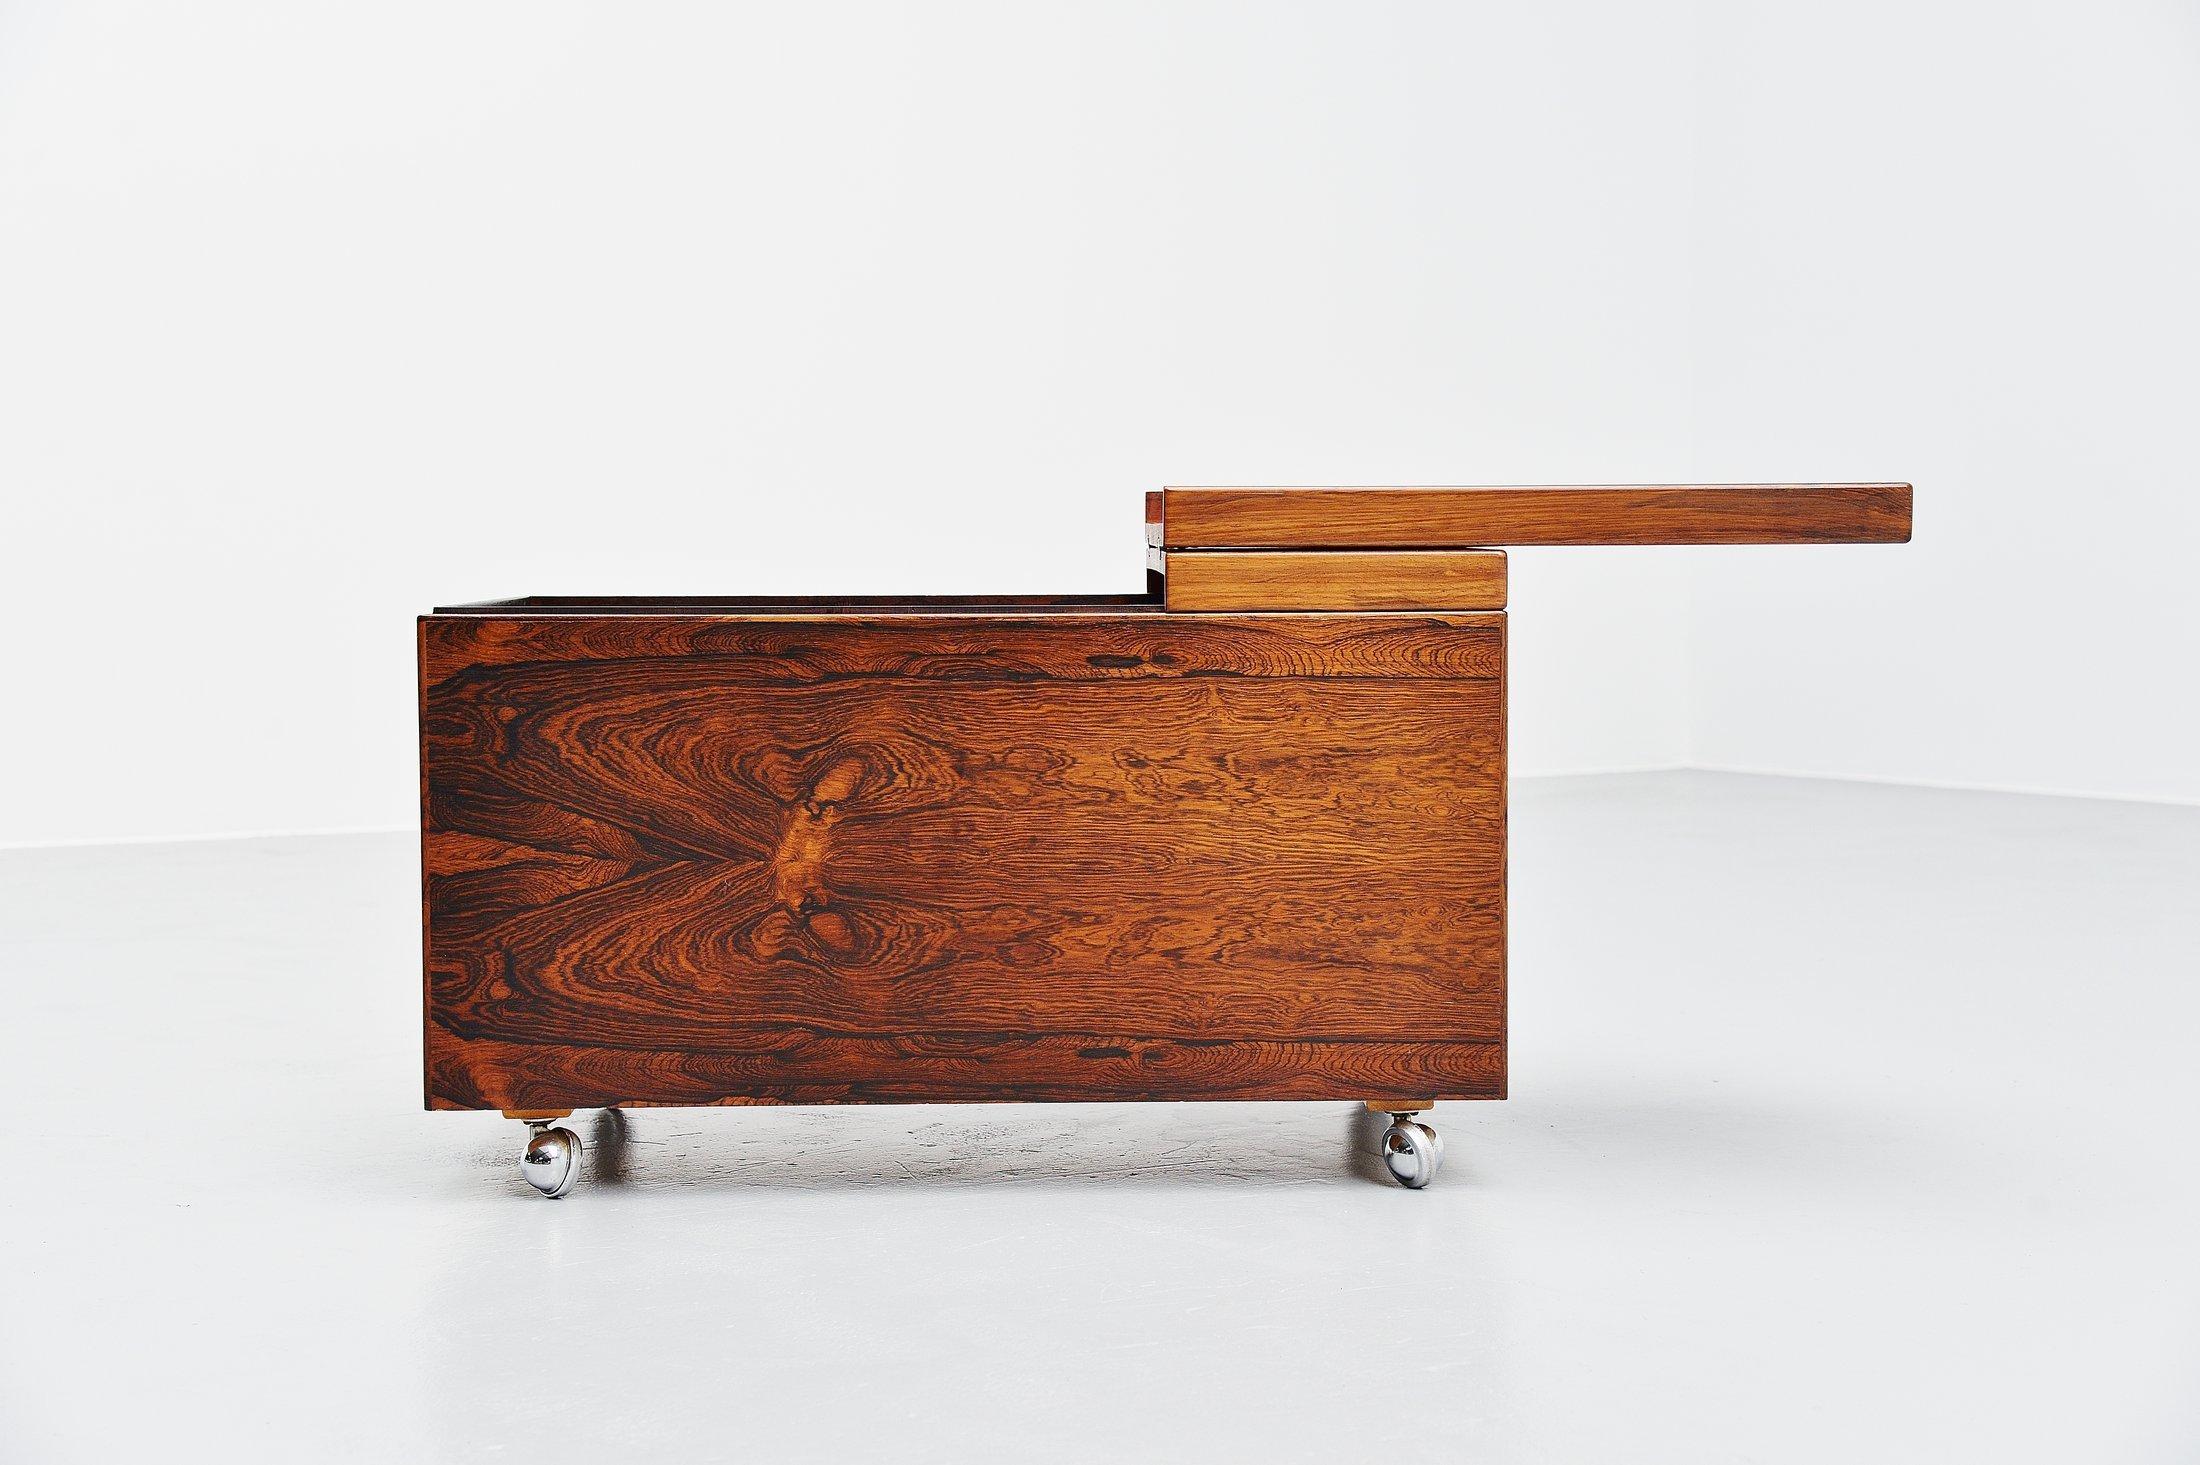 Here for a super nice dry bar table on wheels designed by Poul Norreklit and manufactured by Dyrlund, Denmark, 1960. This super rosewood grained bar table is a work of art on its own, see this beautiful grain all-over, even inside the bar is